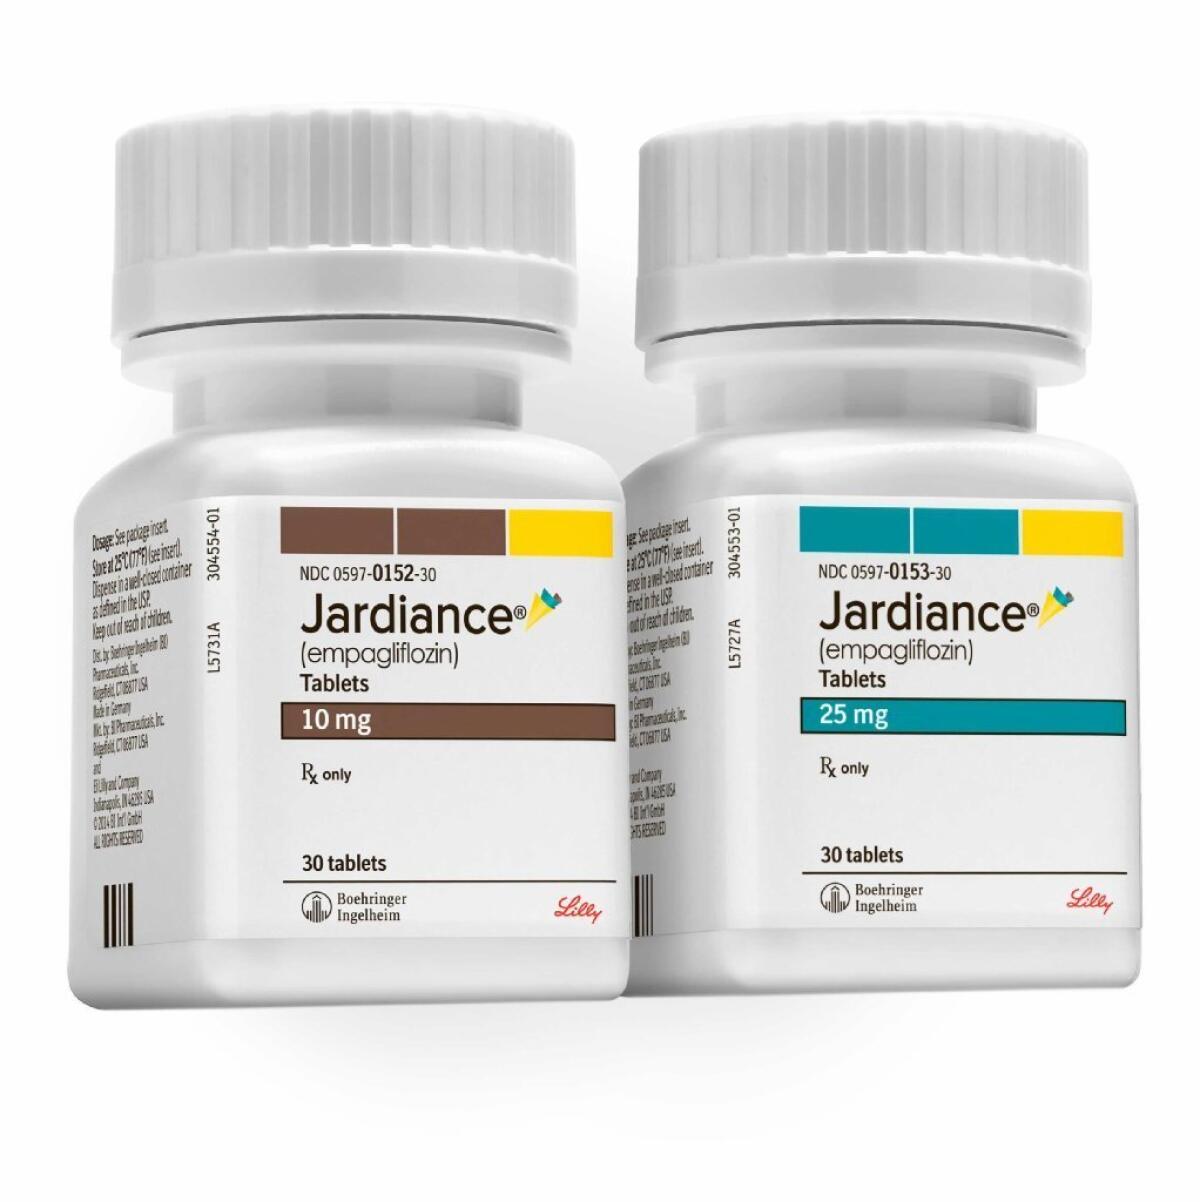 Jardiance, the third in a new class of diabetes drugs that help lower blood glucose, appears to help prevent heart attacks, strokes and premature death in diabetes patients. It would be the first diabetes medication to do so.